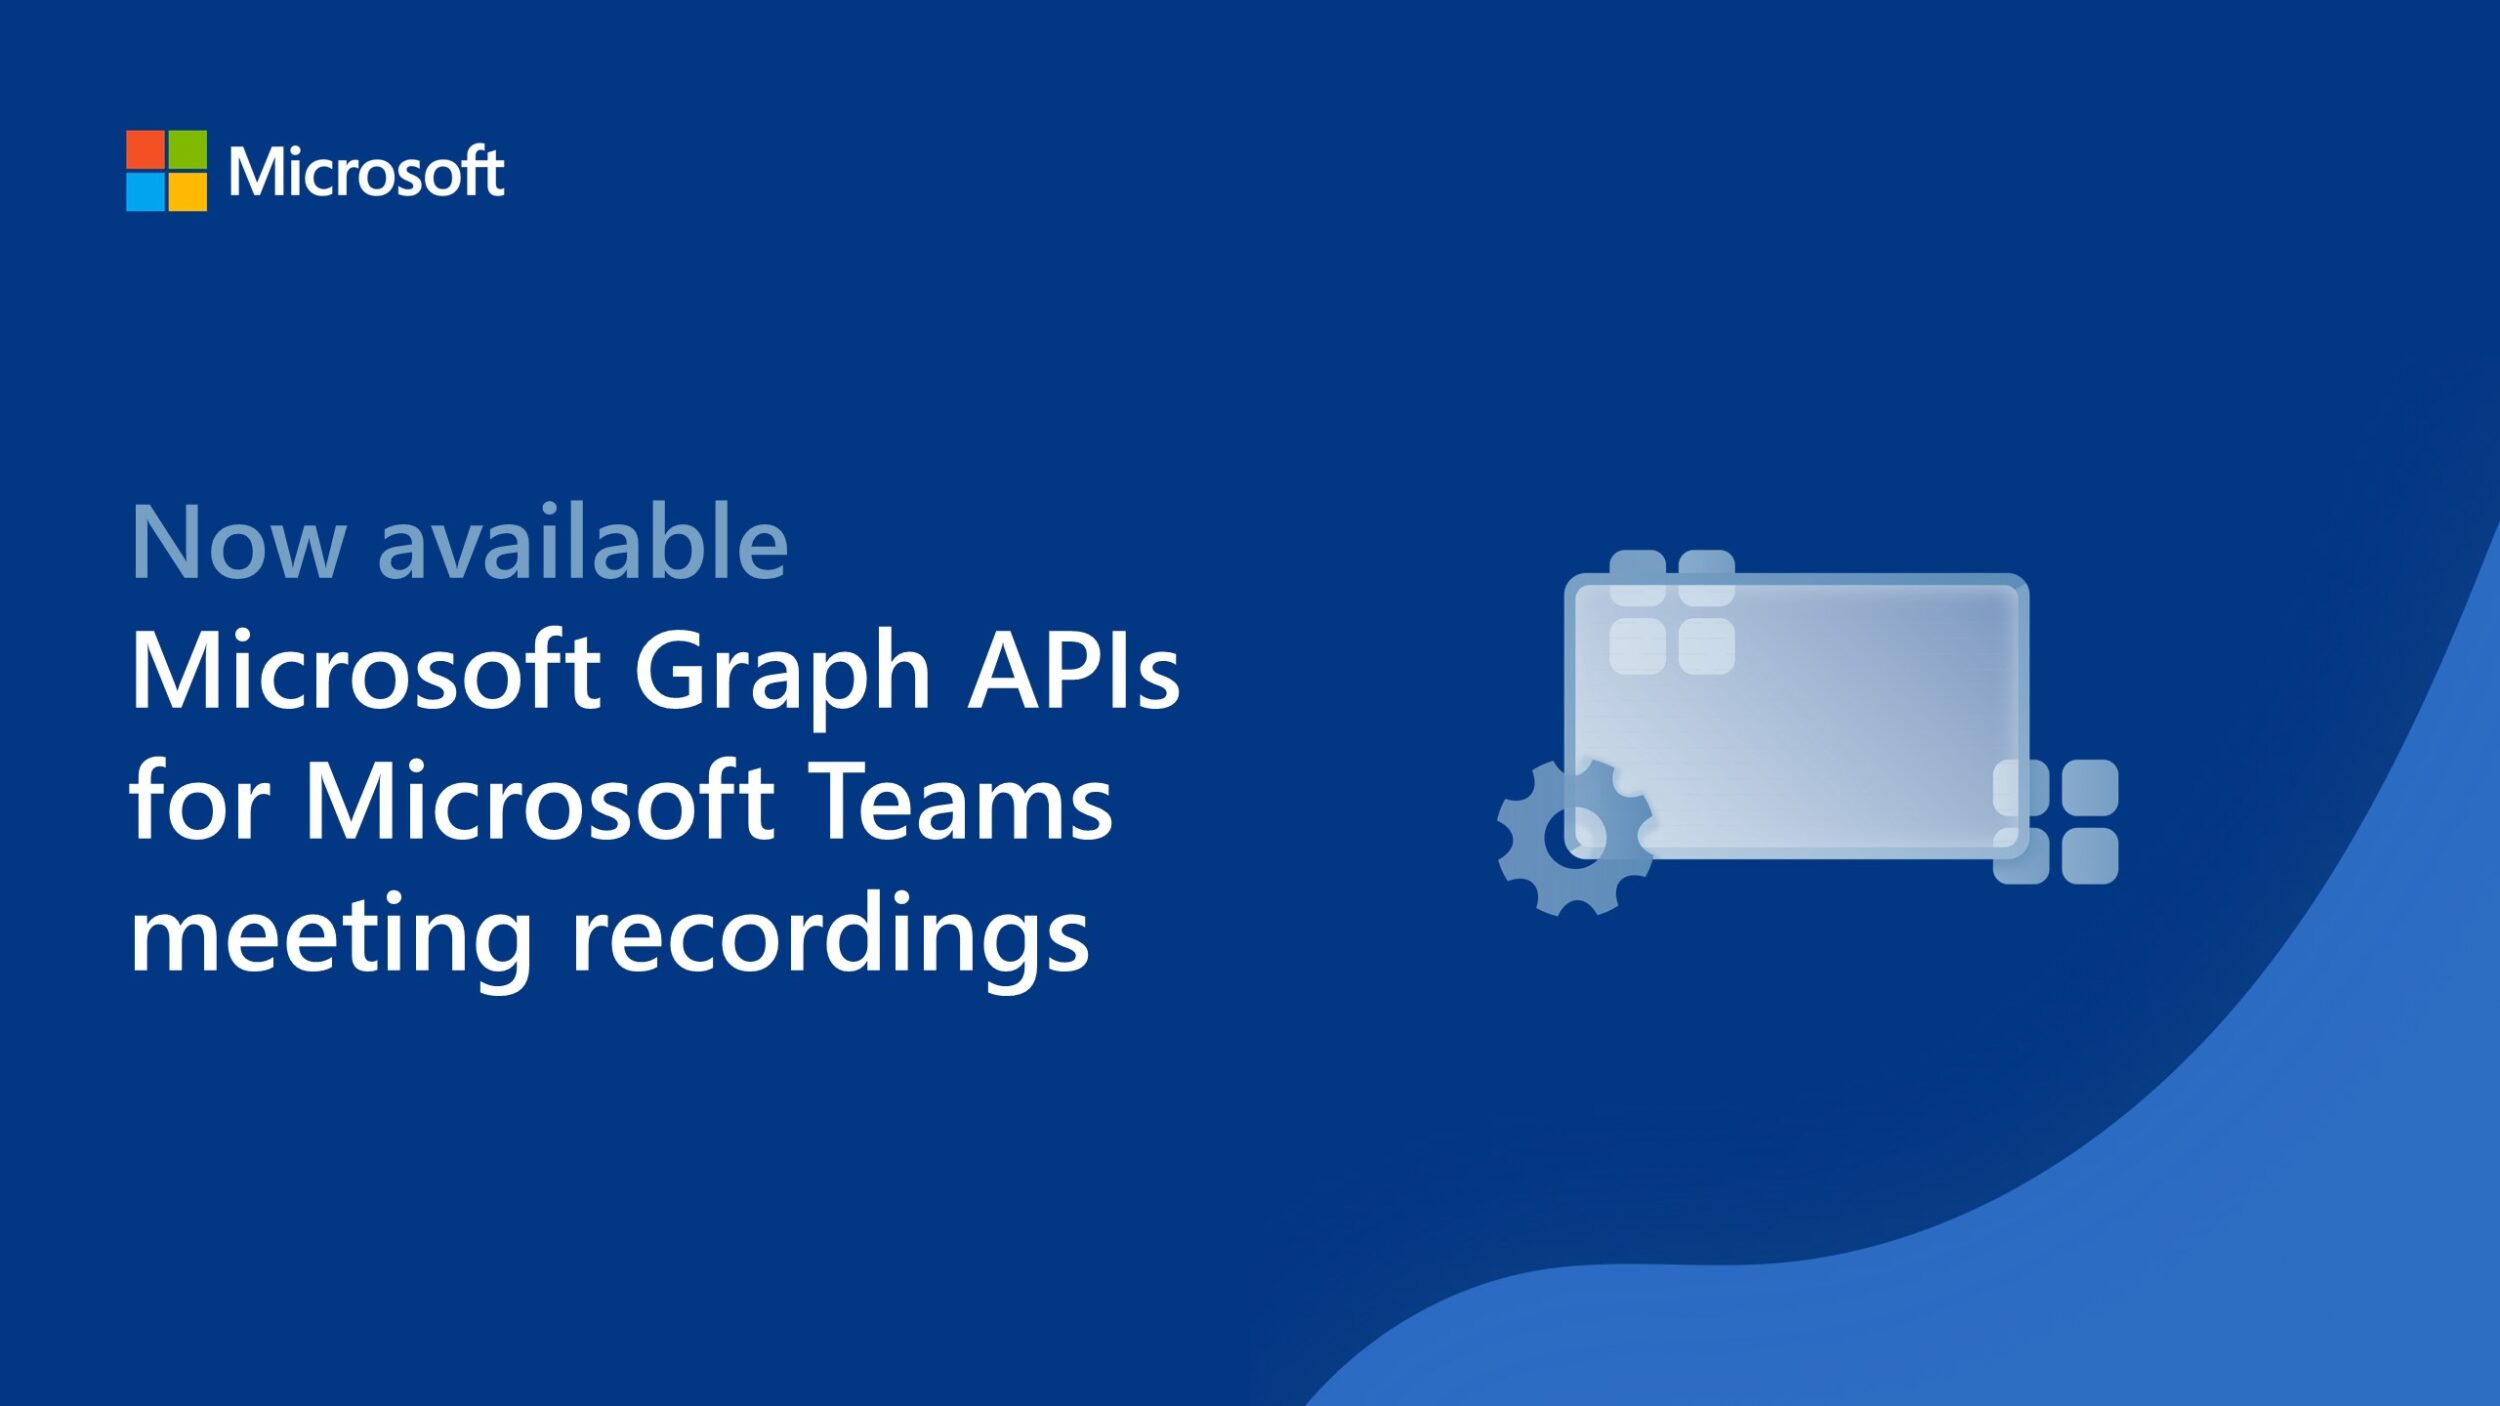 Announcing general availability of Microsoft Graph APIs for Microsoft Teams meeting recordings